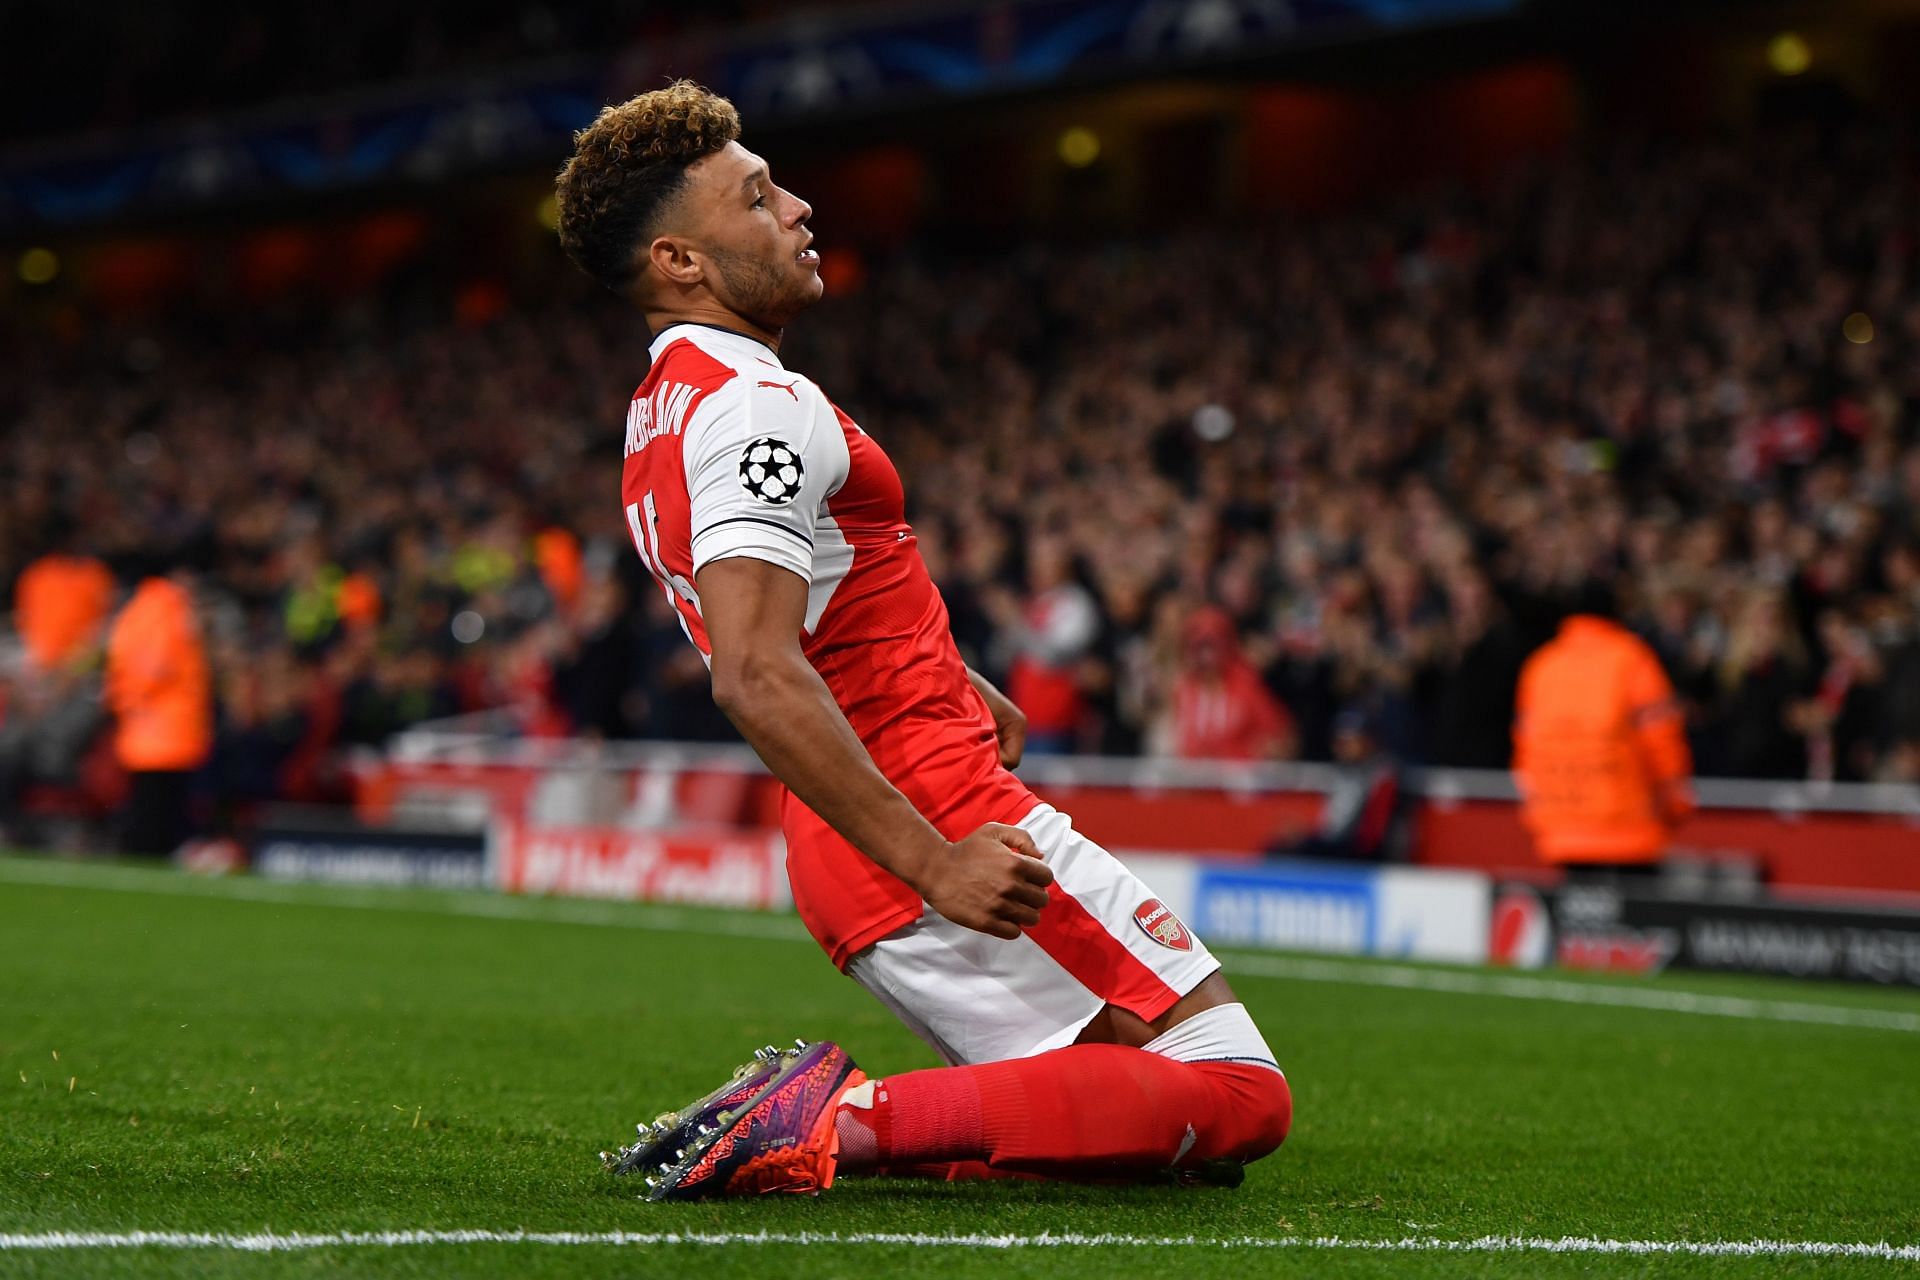 Oxlade-Chamberlain was becoming a fan favorite at the Emirates.